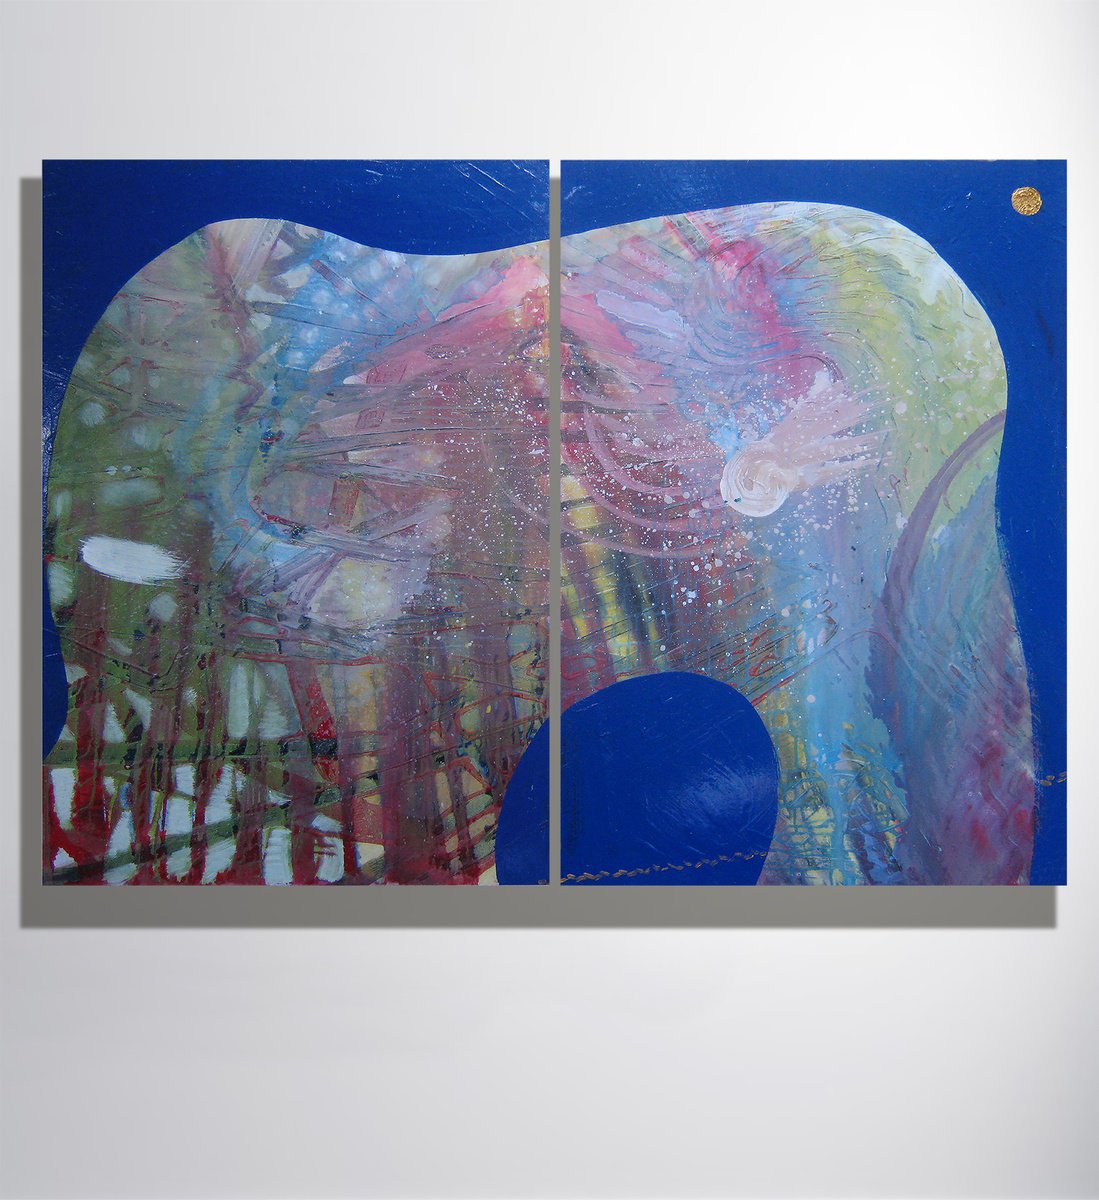 Elephant and ocean diptych by Marya Matienko